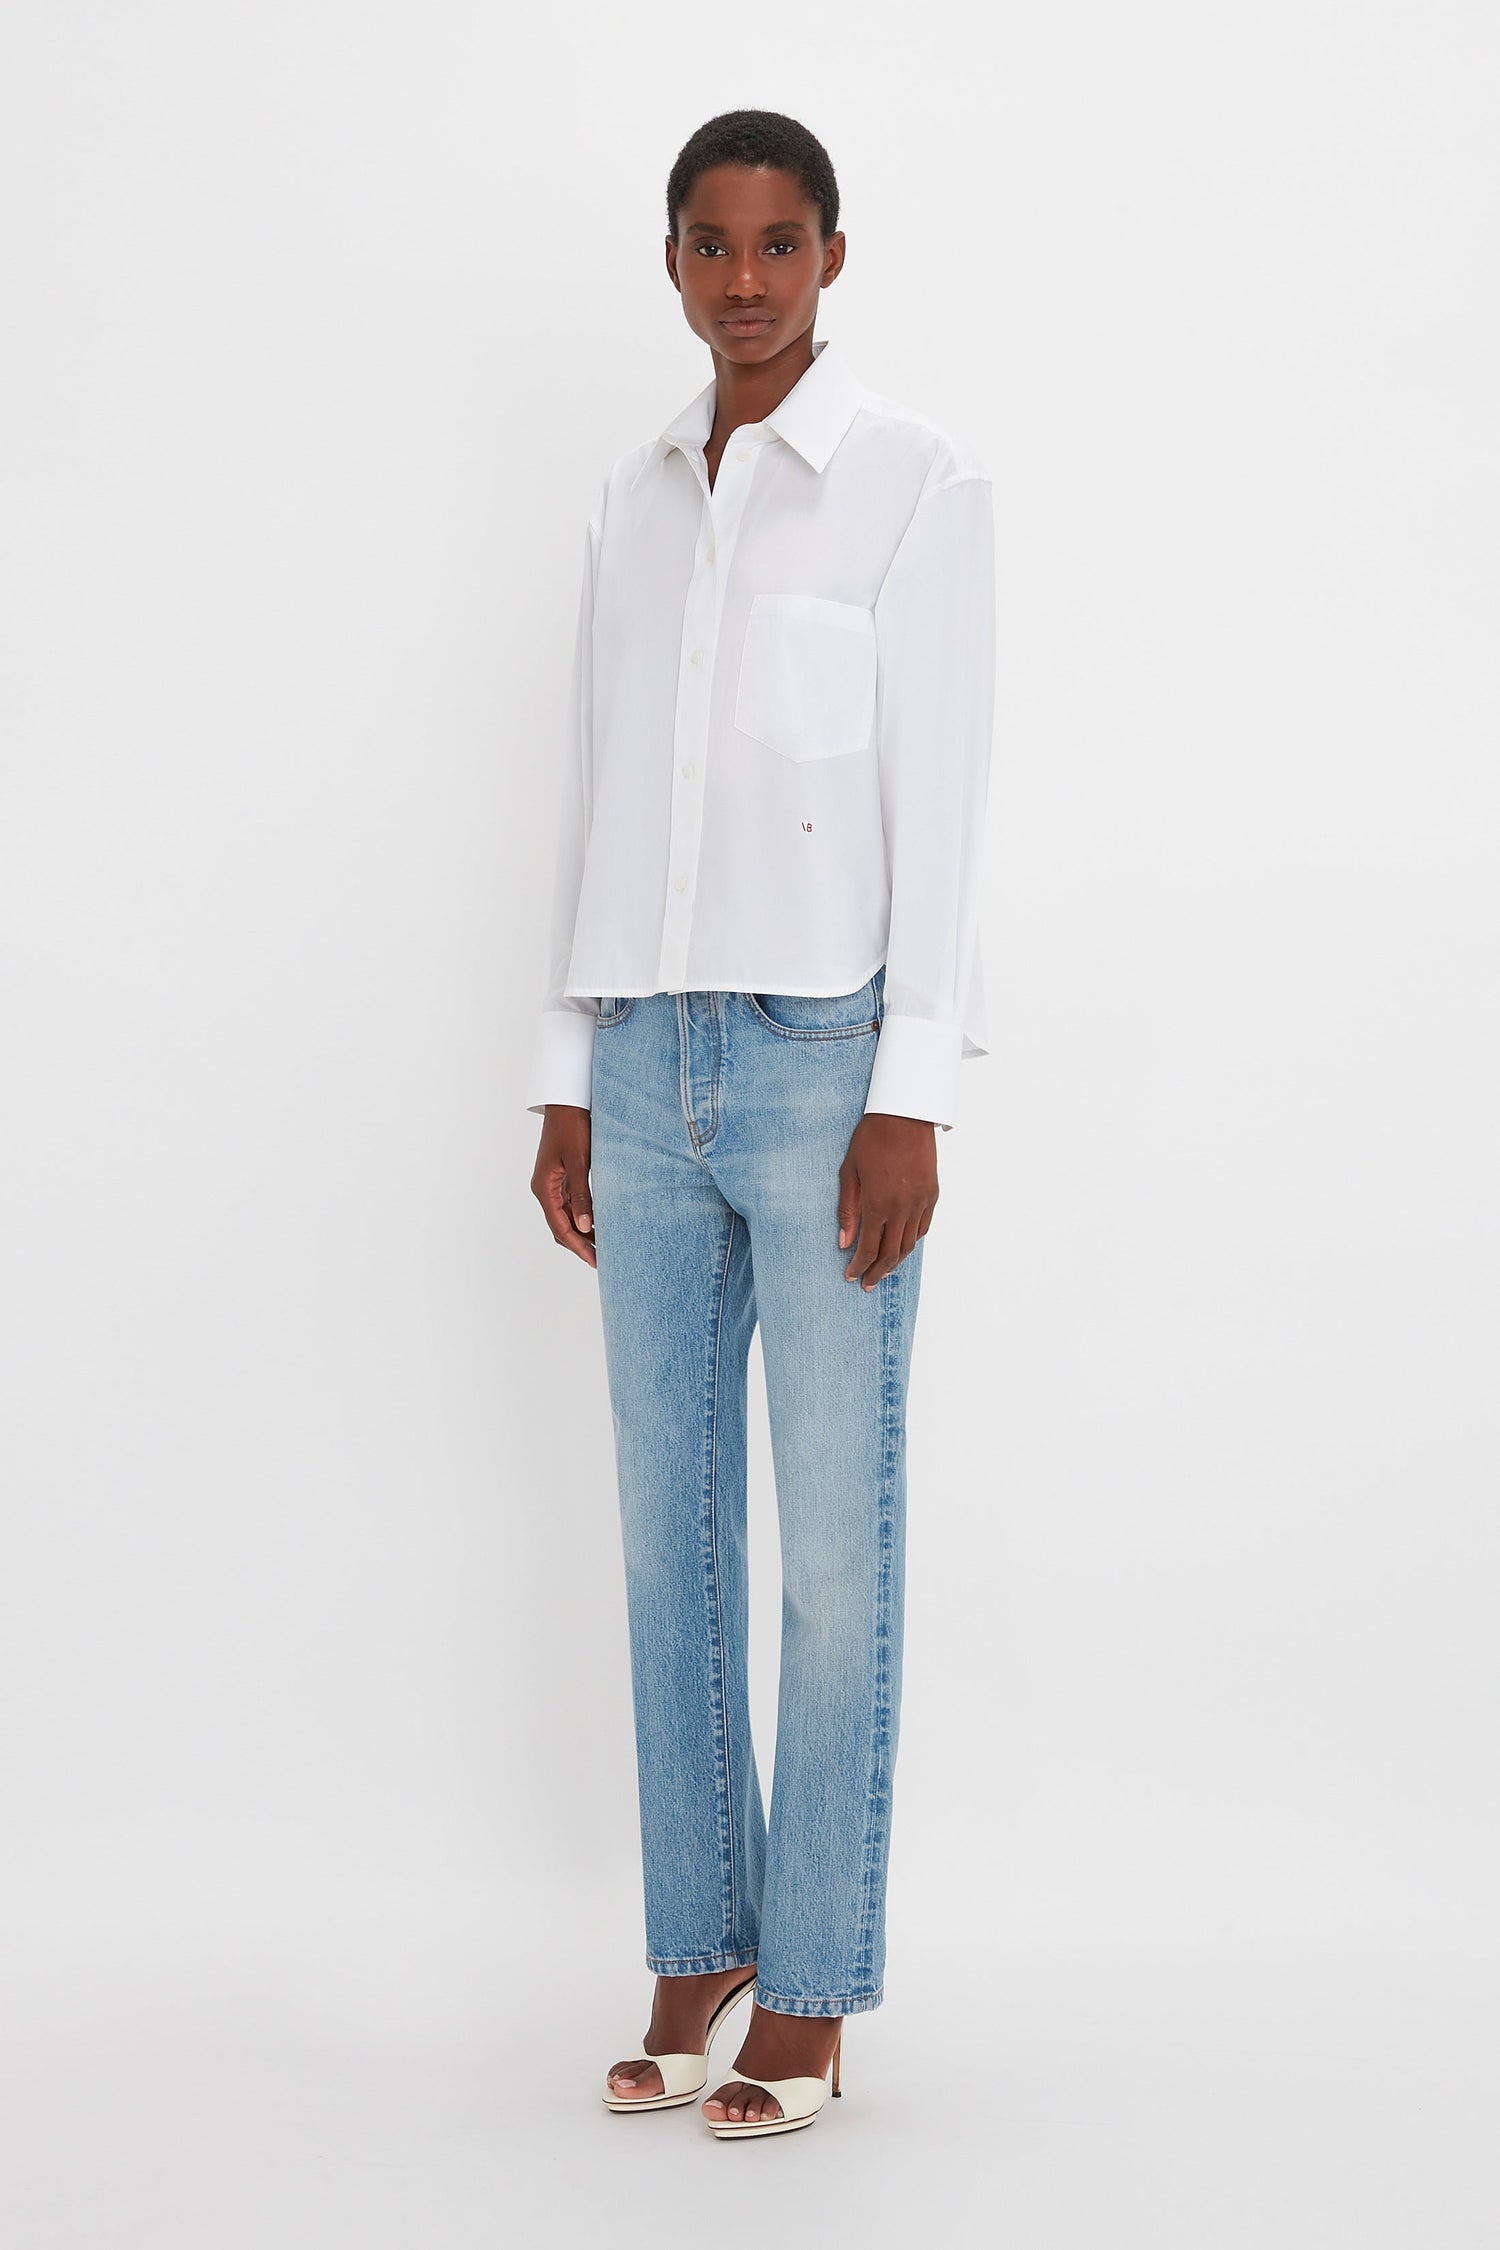 A woman wearing a classic Victoria Beckham cropped long sleeve shirt in white and blue jeans standing against a plain white background.